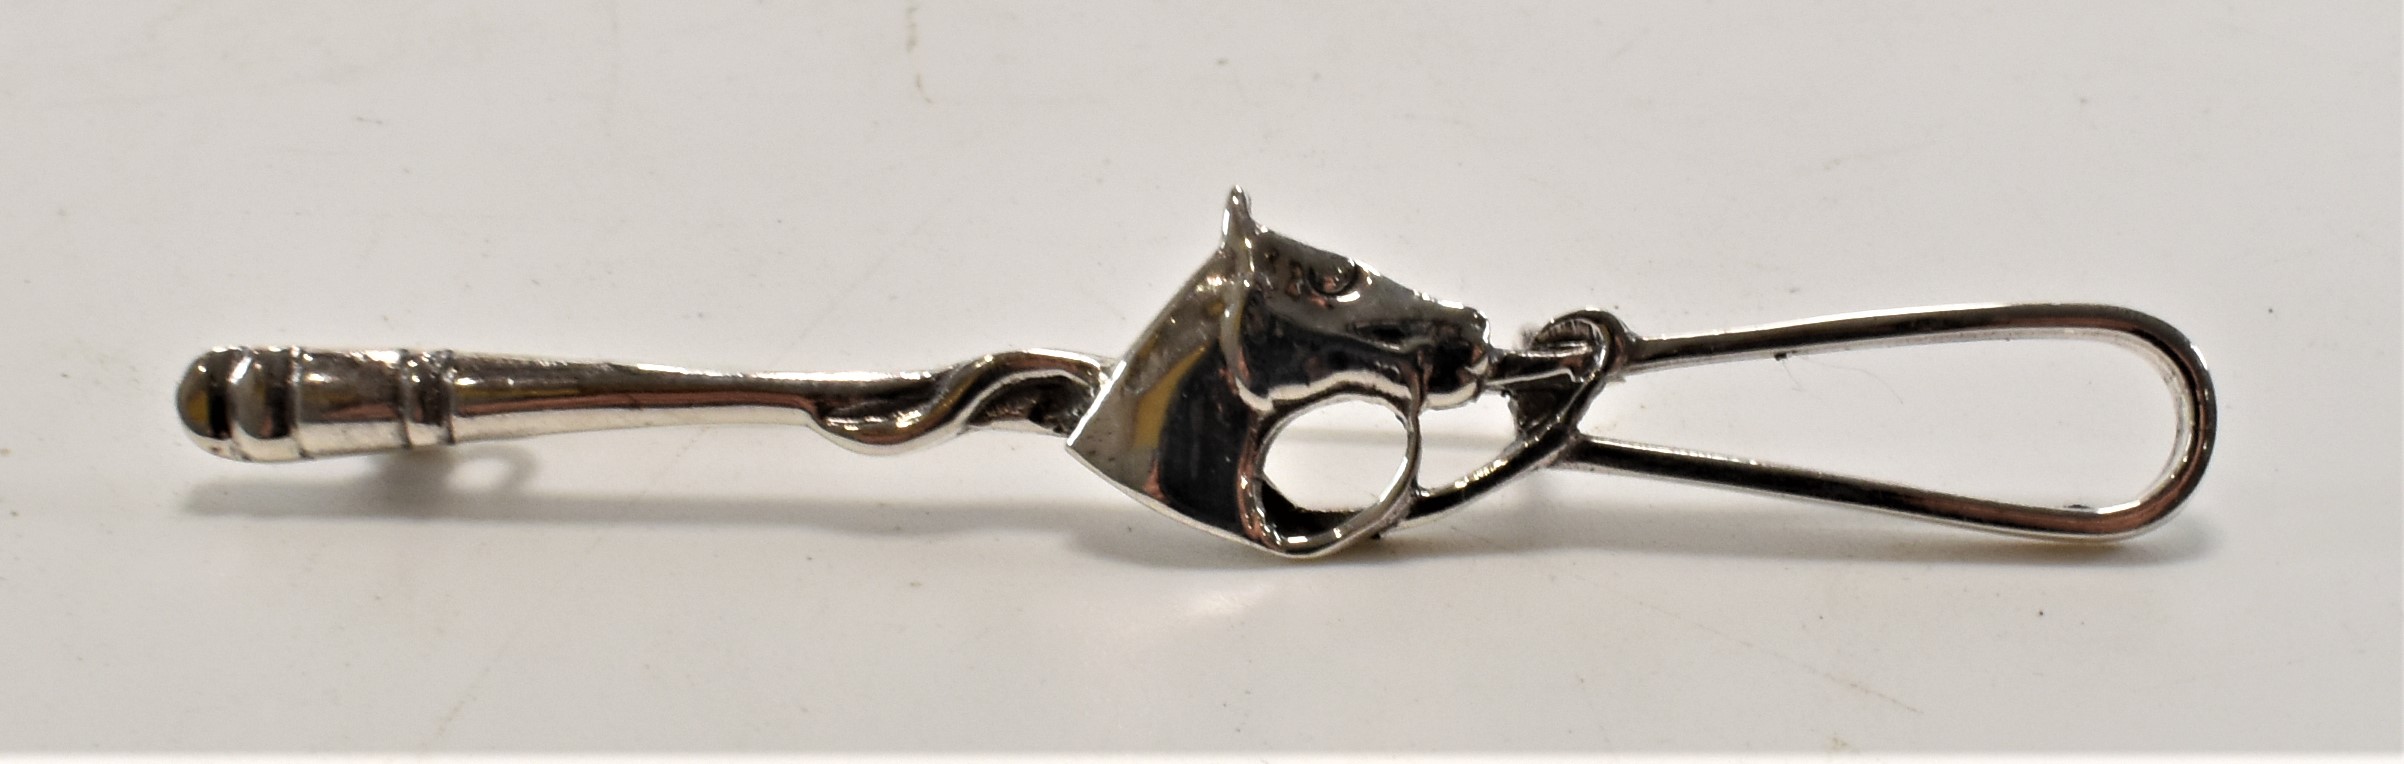 SILVER HORSE WHIP BROOCH